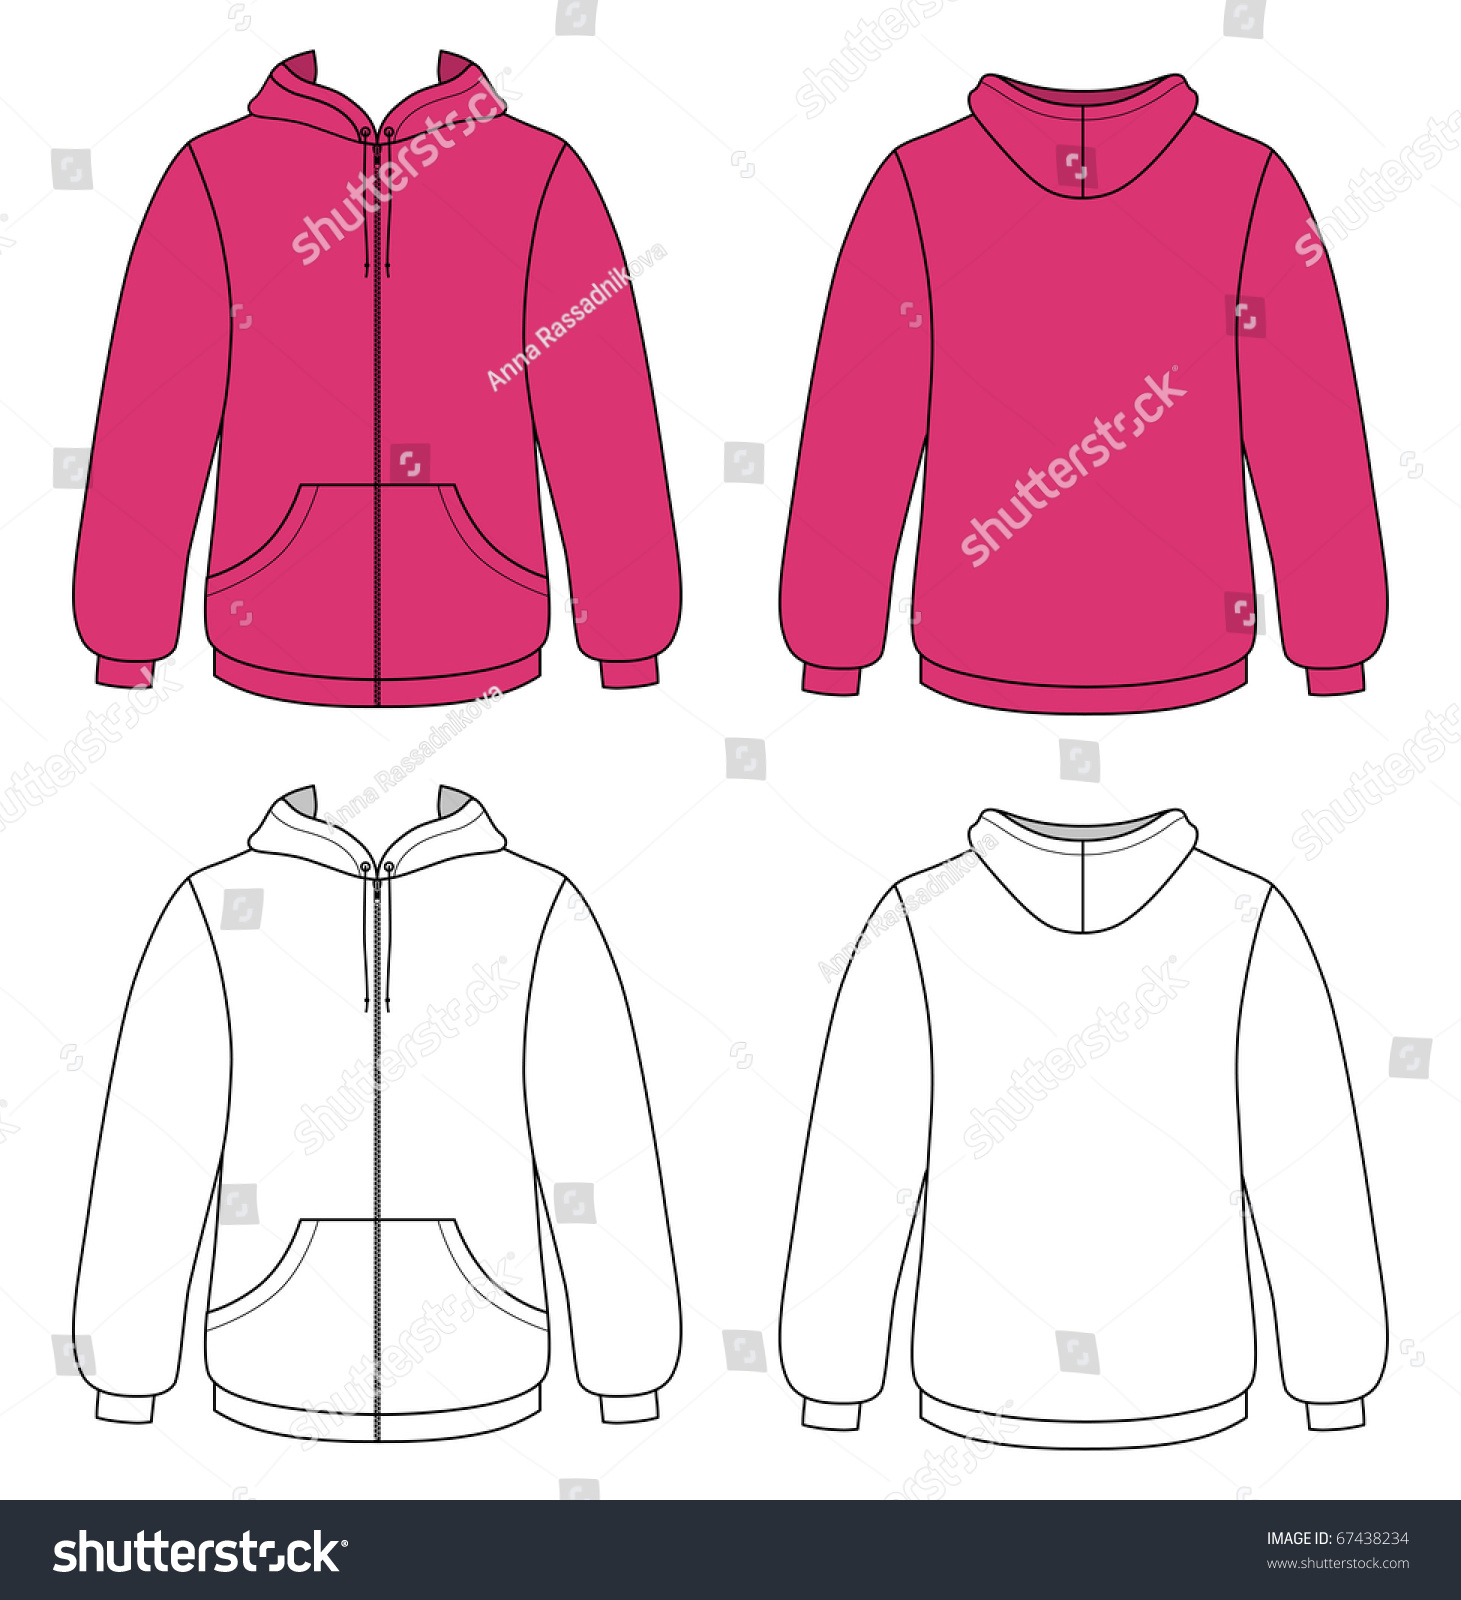 Template Outline Illustration Of A Blank Hooded Sweater 67438234